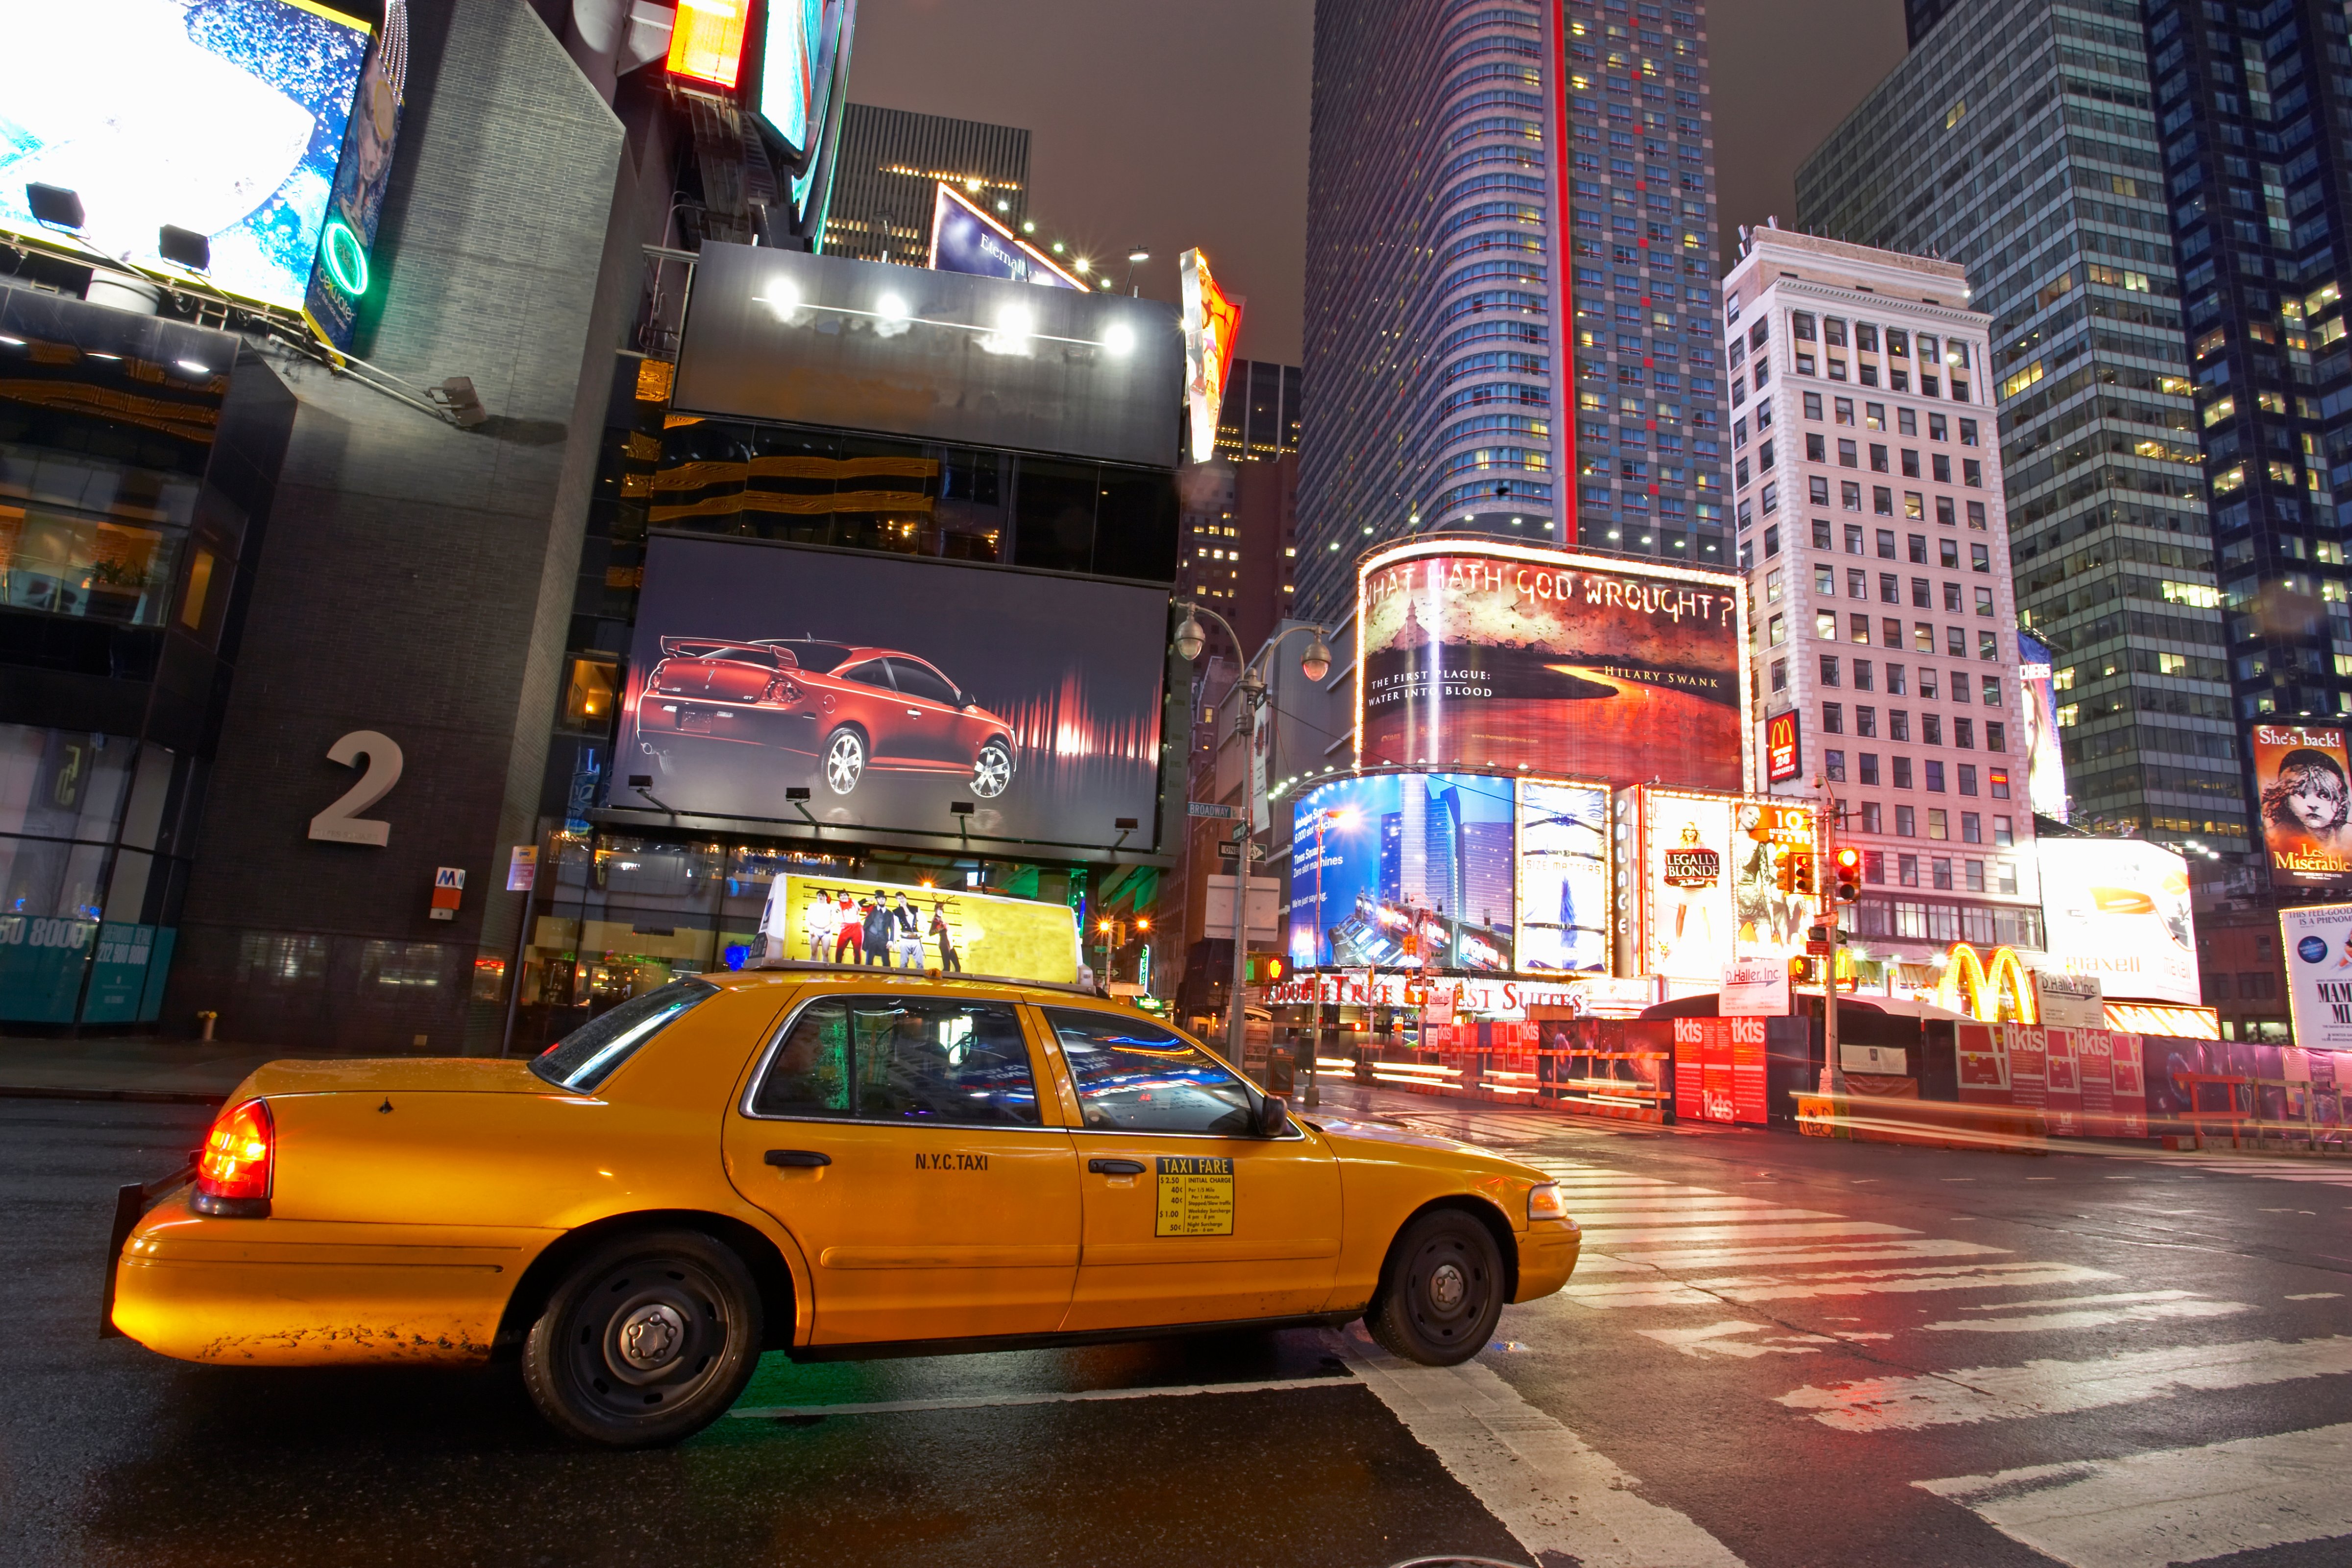 USA, New York, Times Square, yellow taxi cab (Getty Images / Getty Images)